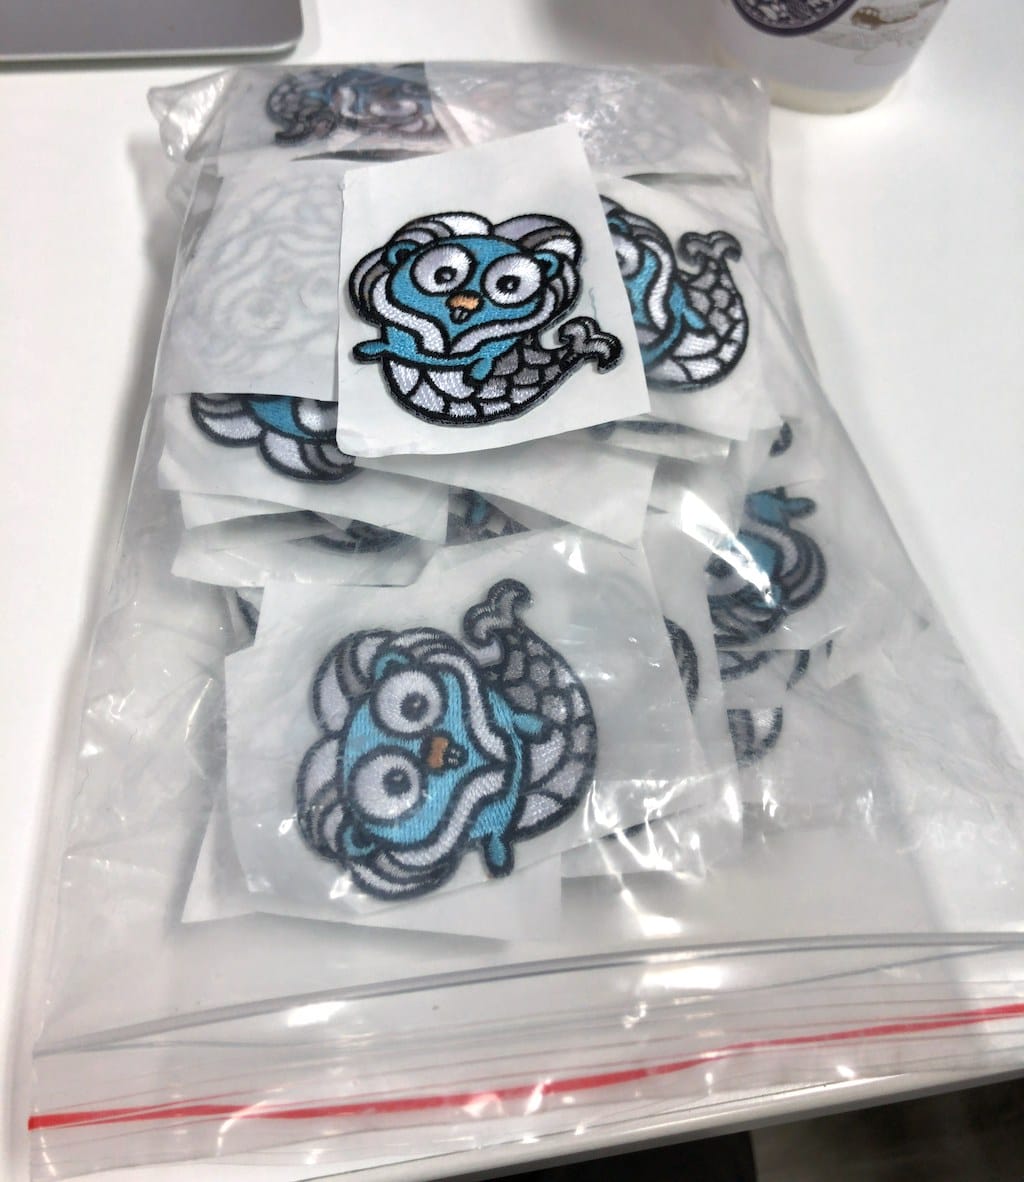 Gophercon Singapore mascot embroidered stickers, from Shenzen Awells Gift Co., Ltd.